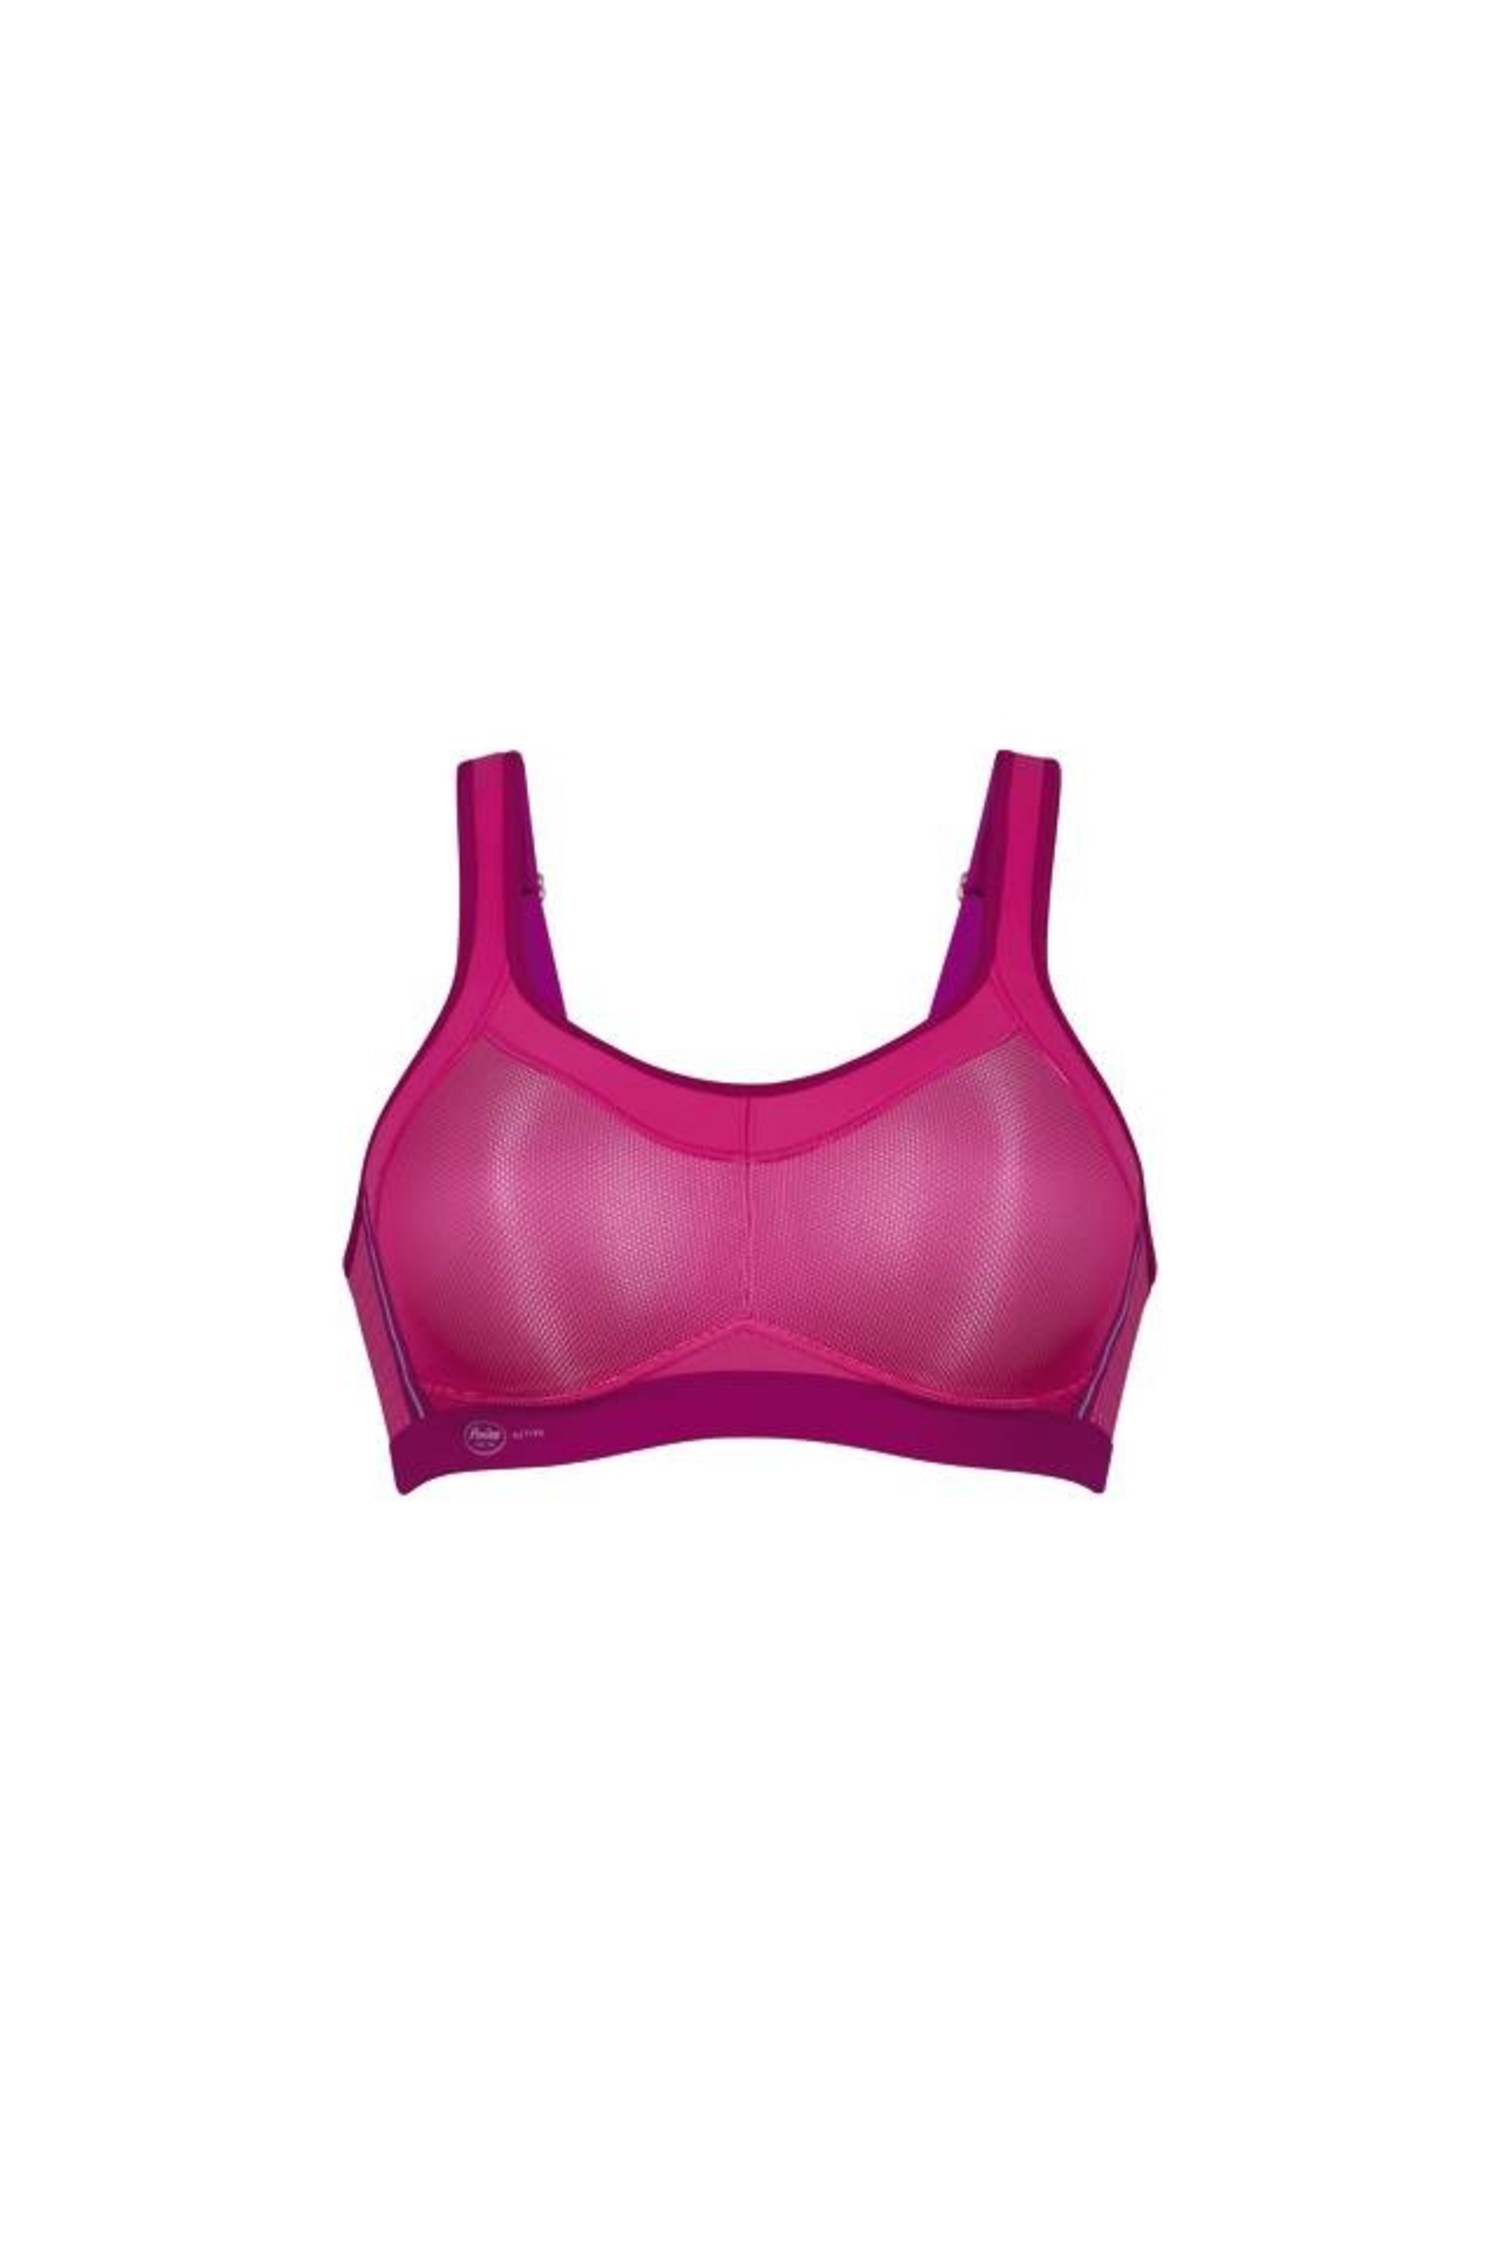 Anita Active Momentum Sports Bra - Electric Pink - She Science